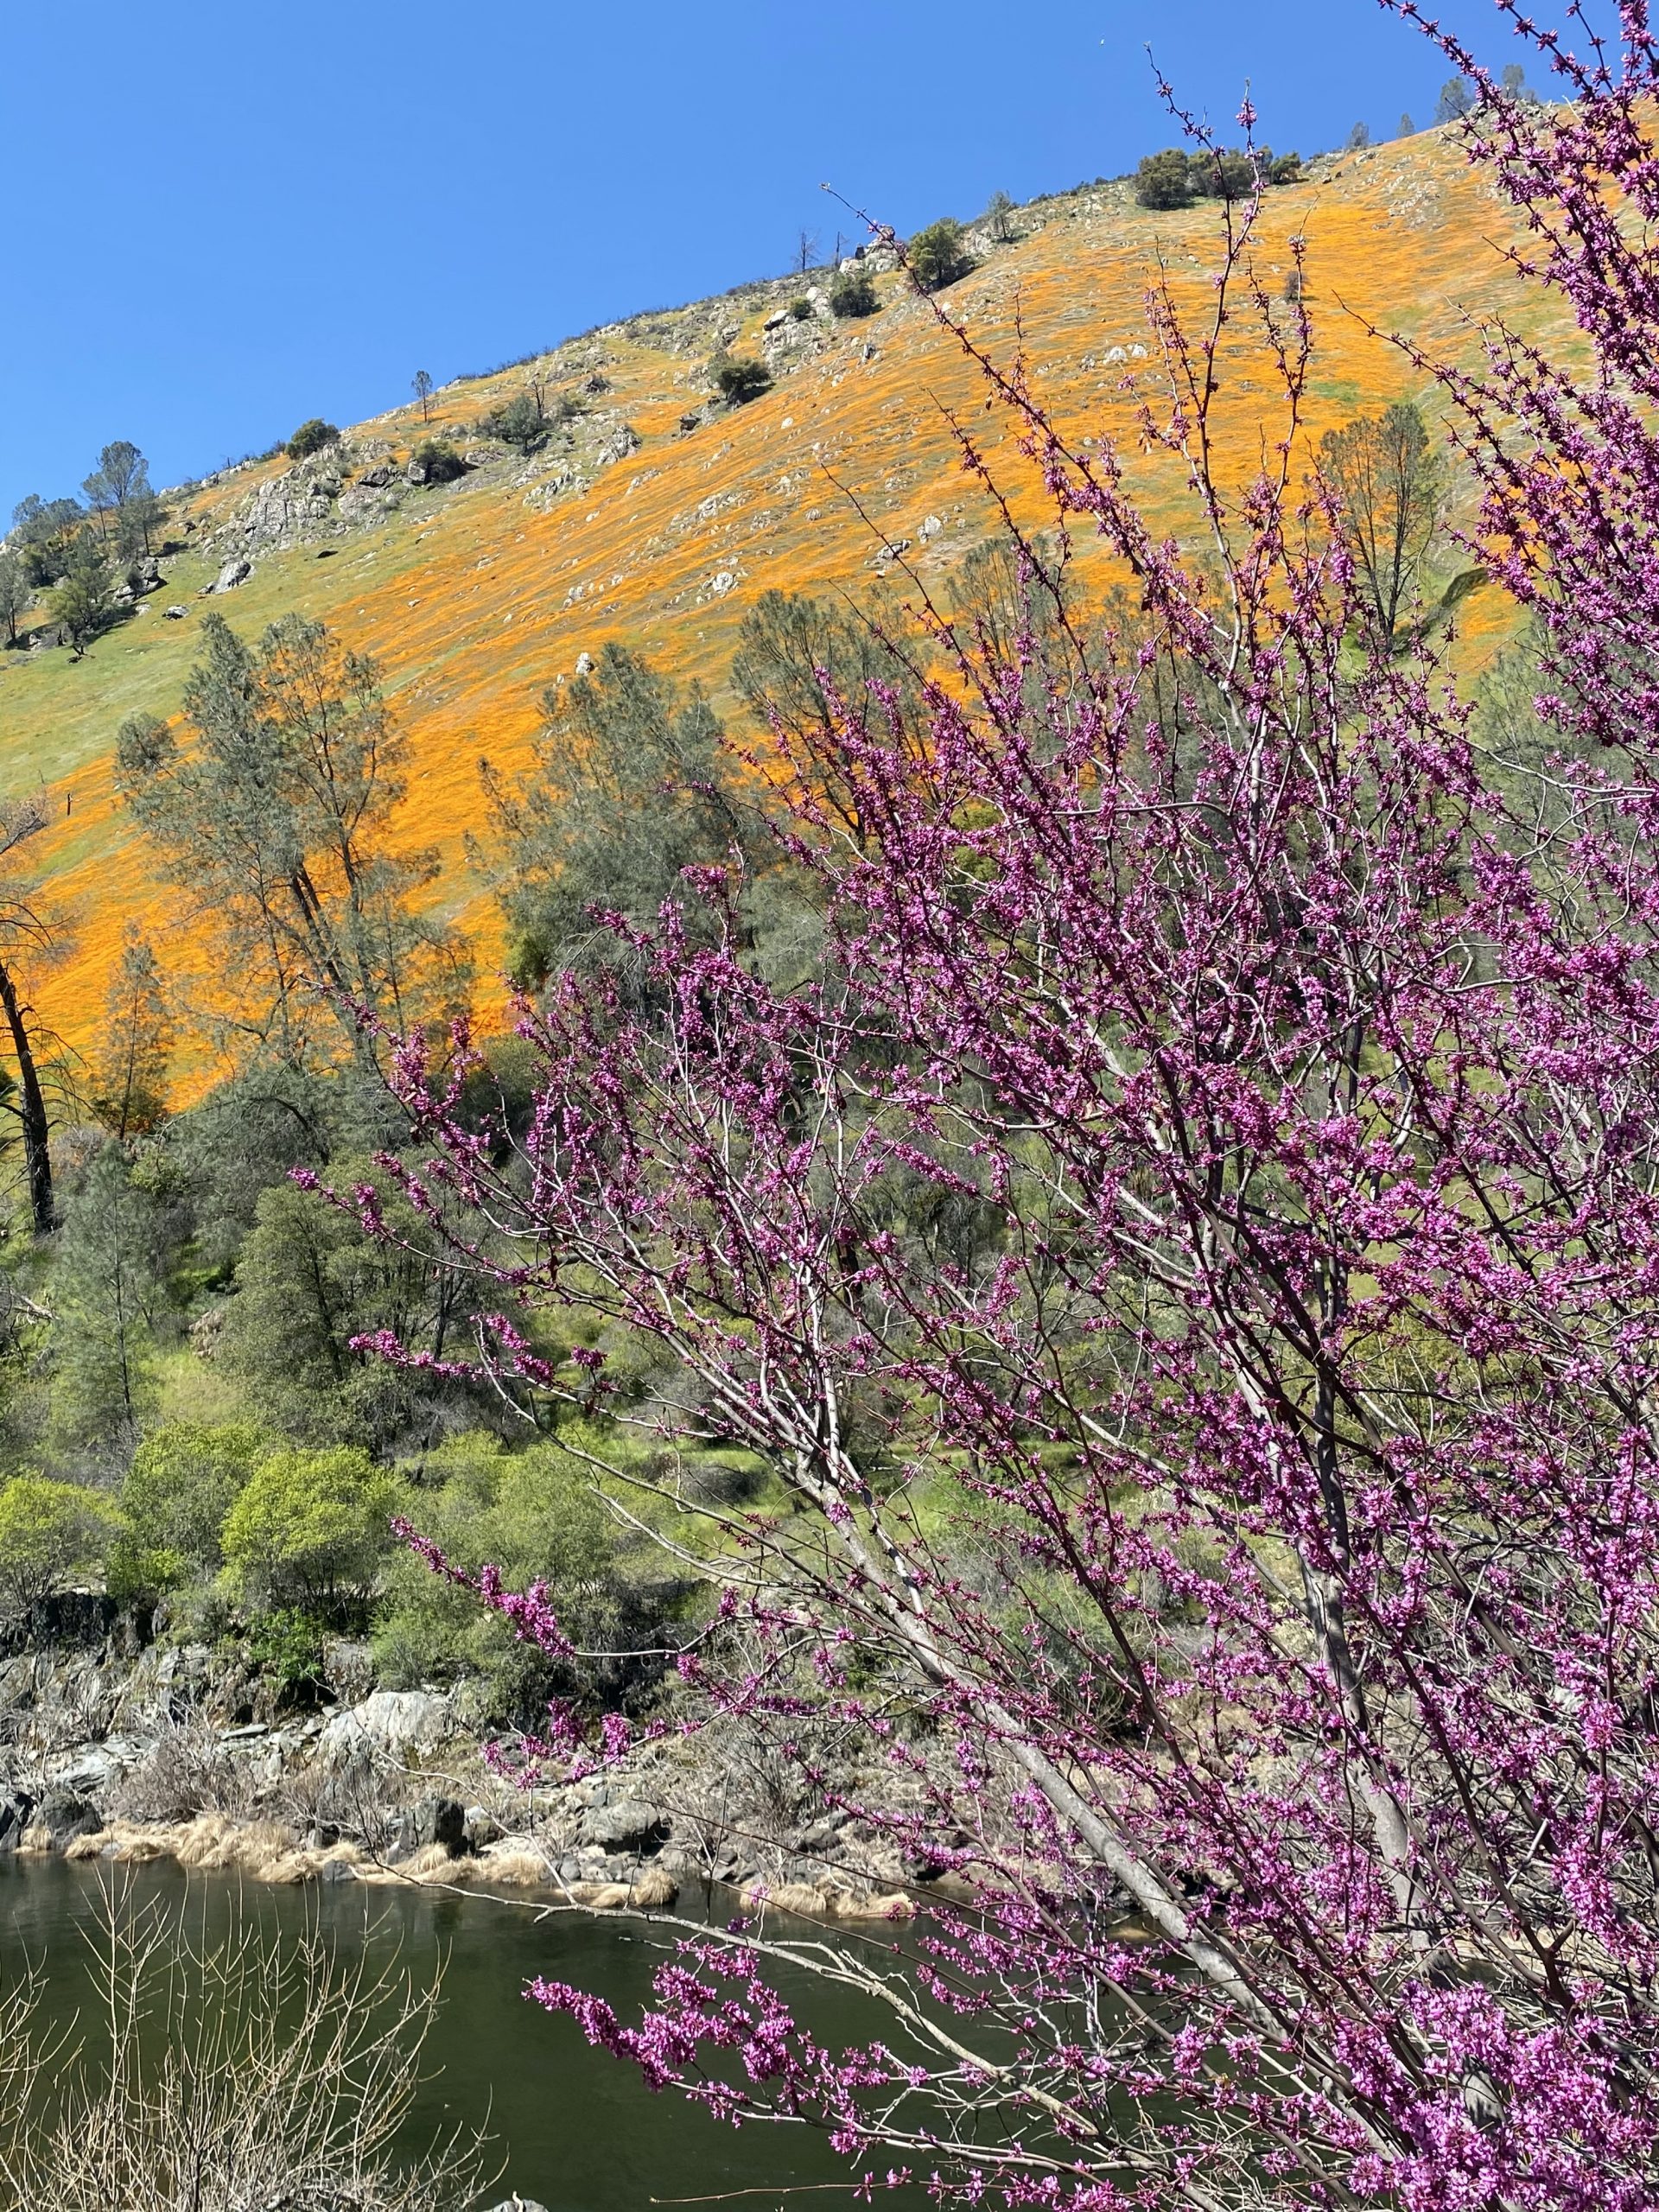 A redbud in bloom by the Merced River. The hill in the background is covered in golden yellow flowers.